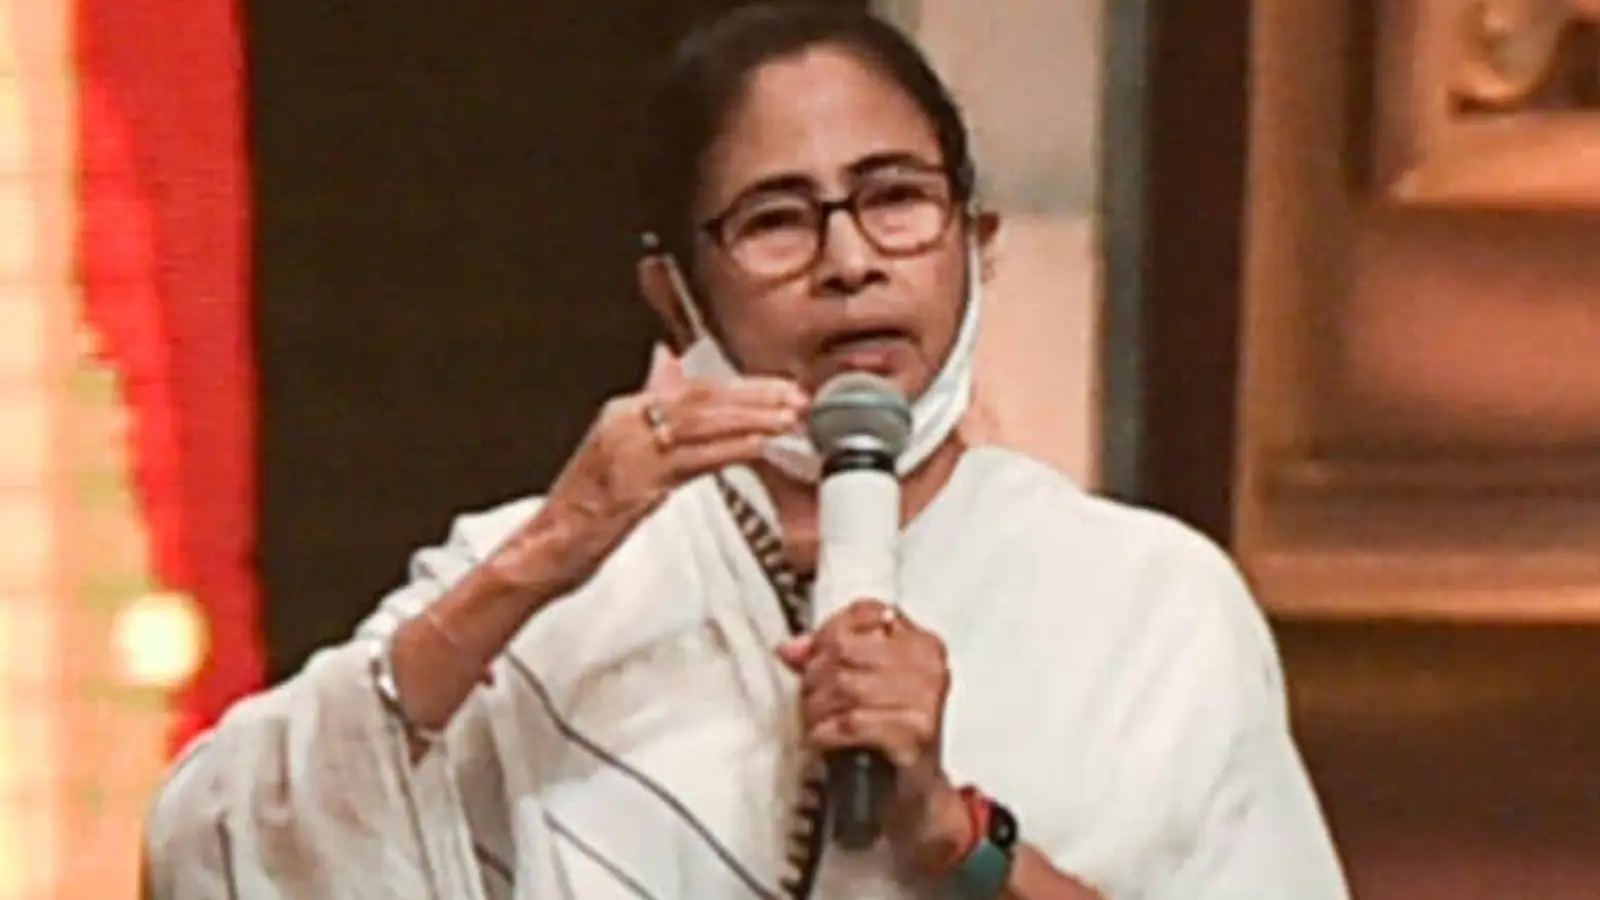 Mamata says NSO got here to Bengal to promote Pegasus adware, however she rejected provide